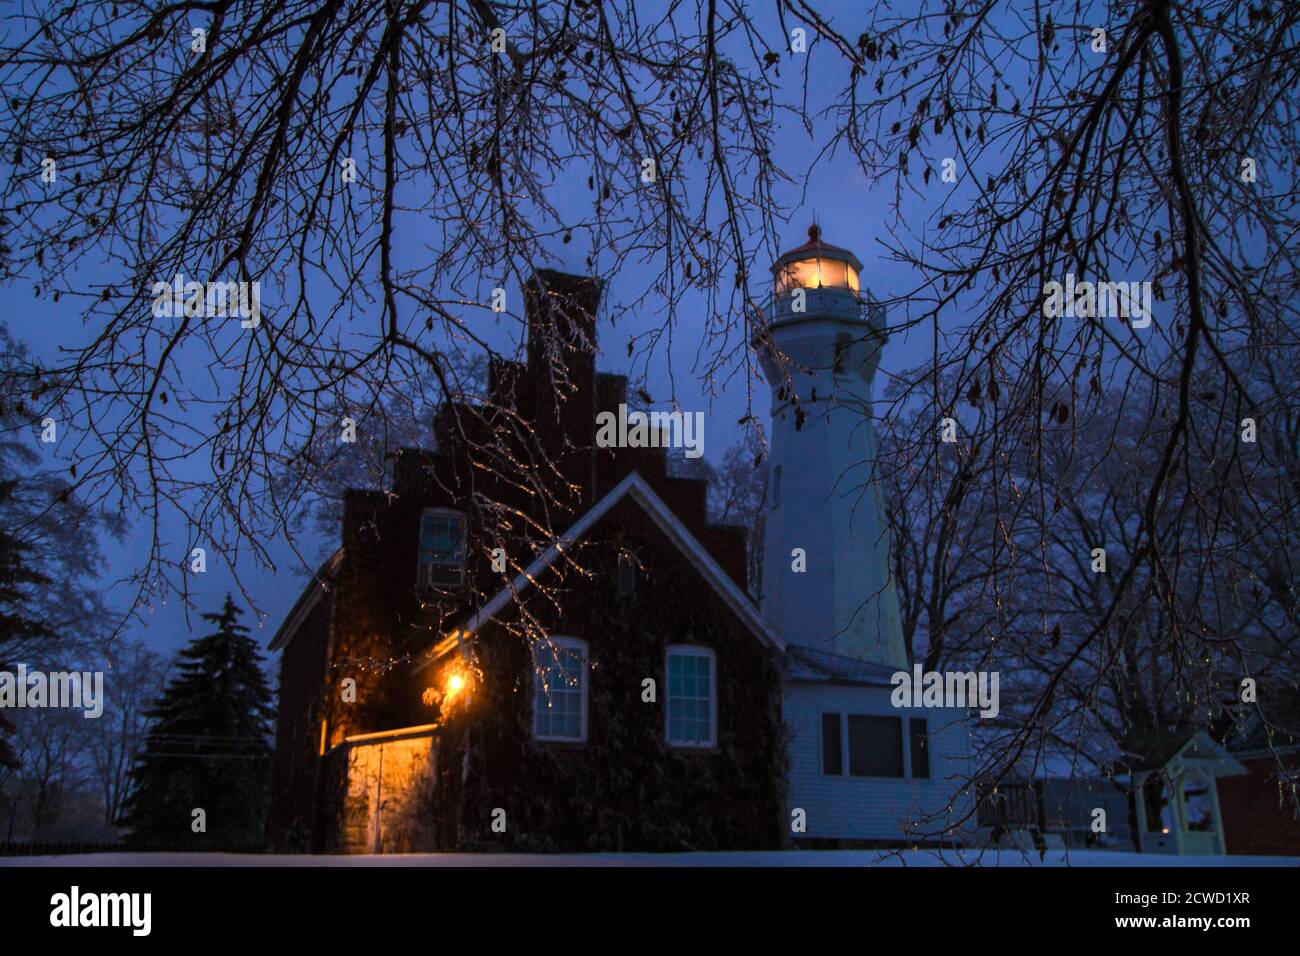 Port Sanilac, Michigan, USA -  December 12, 2013: Illuminated beacon of the Port Sanilac Lighthouse surrounded by icicles on a cold winter night. Stock Photo